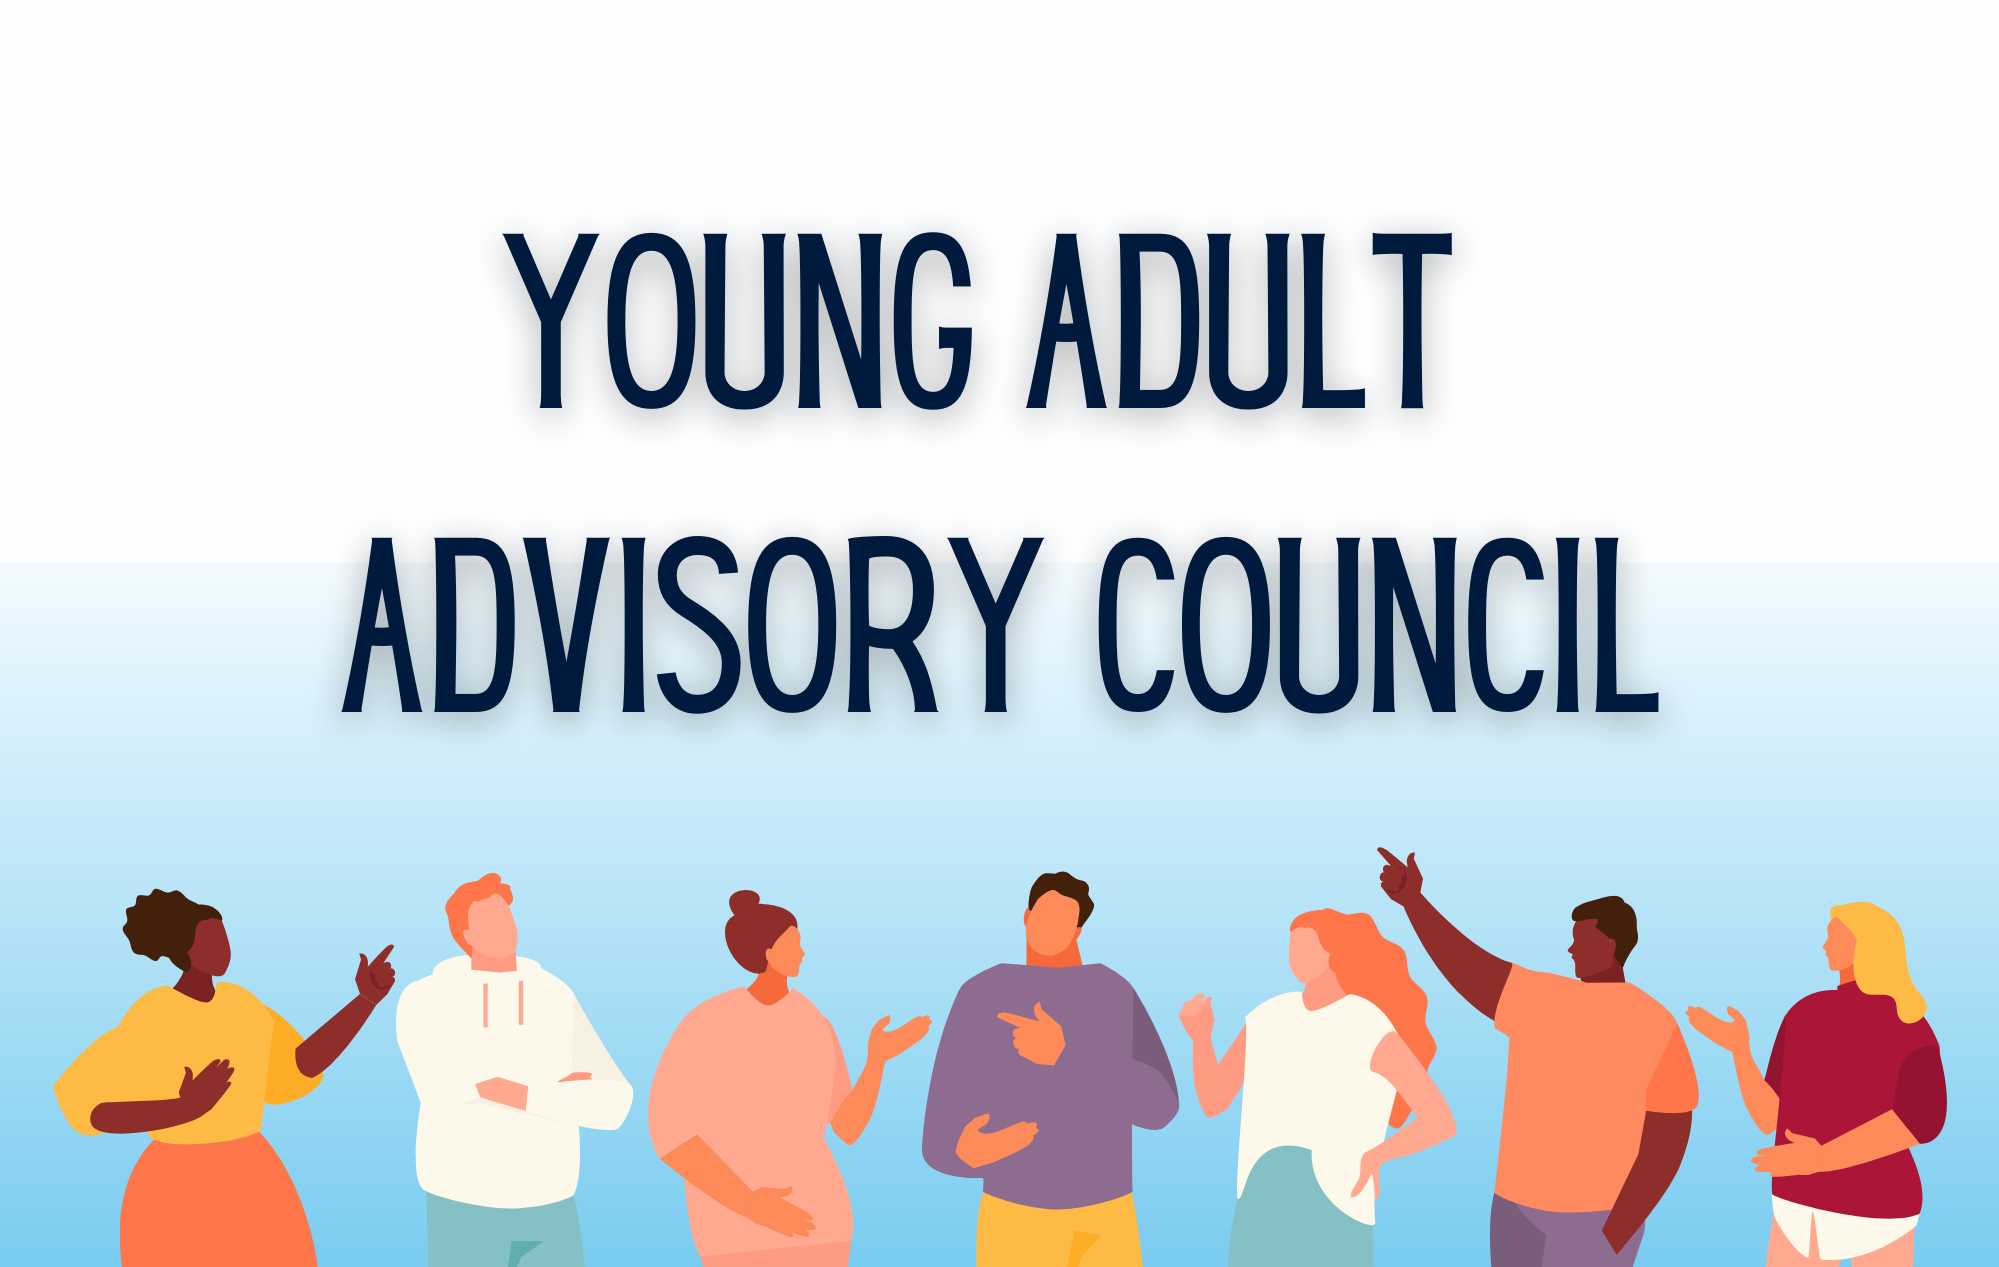 graphic of a group of young people underneath the words "Young Adult Advisory Council" 